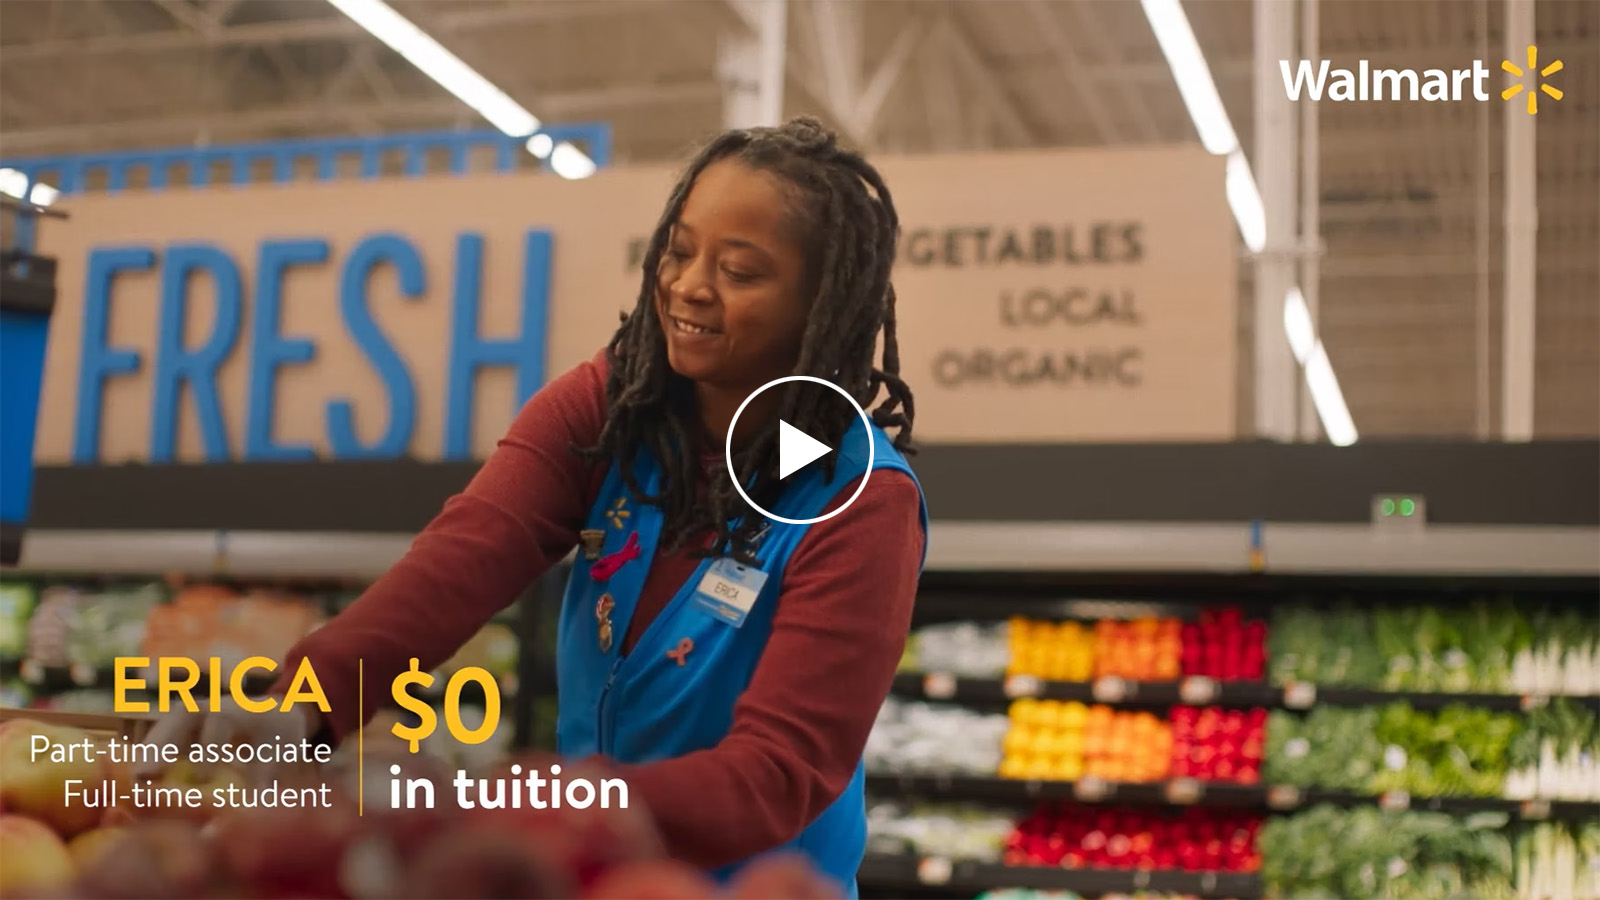 Screen capture with play icon from video. Capture shows associate stocking grocery. Text on screen reads Erica part-time associate full-time student. $0 in tuition.